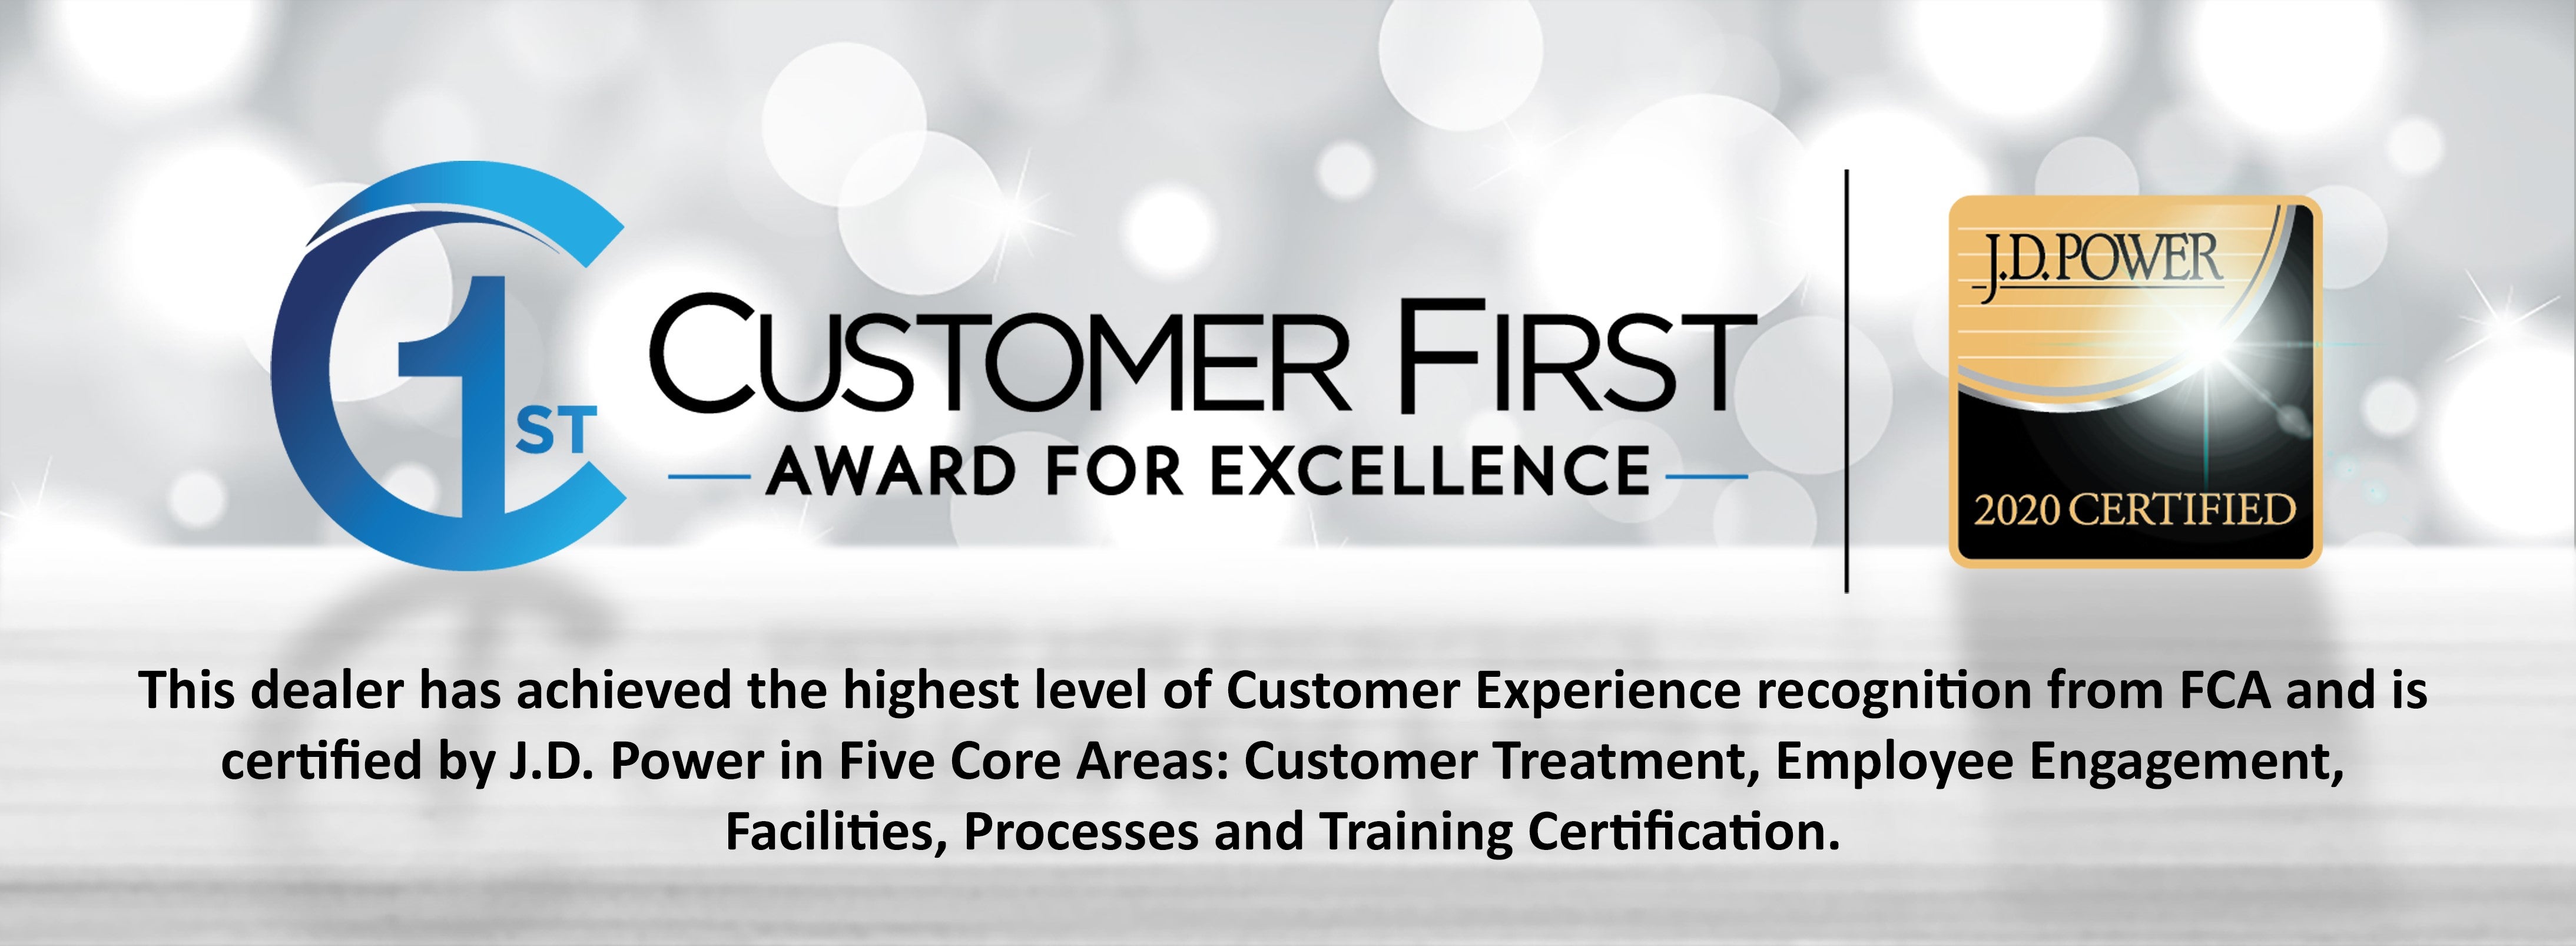 Customer First Award for Excellence for 2019 at Pella Motors CDJR in Pella, IA